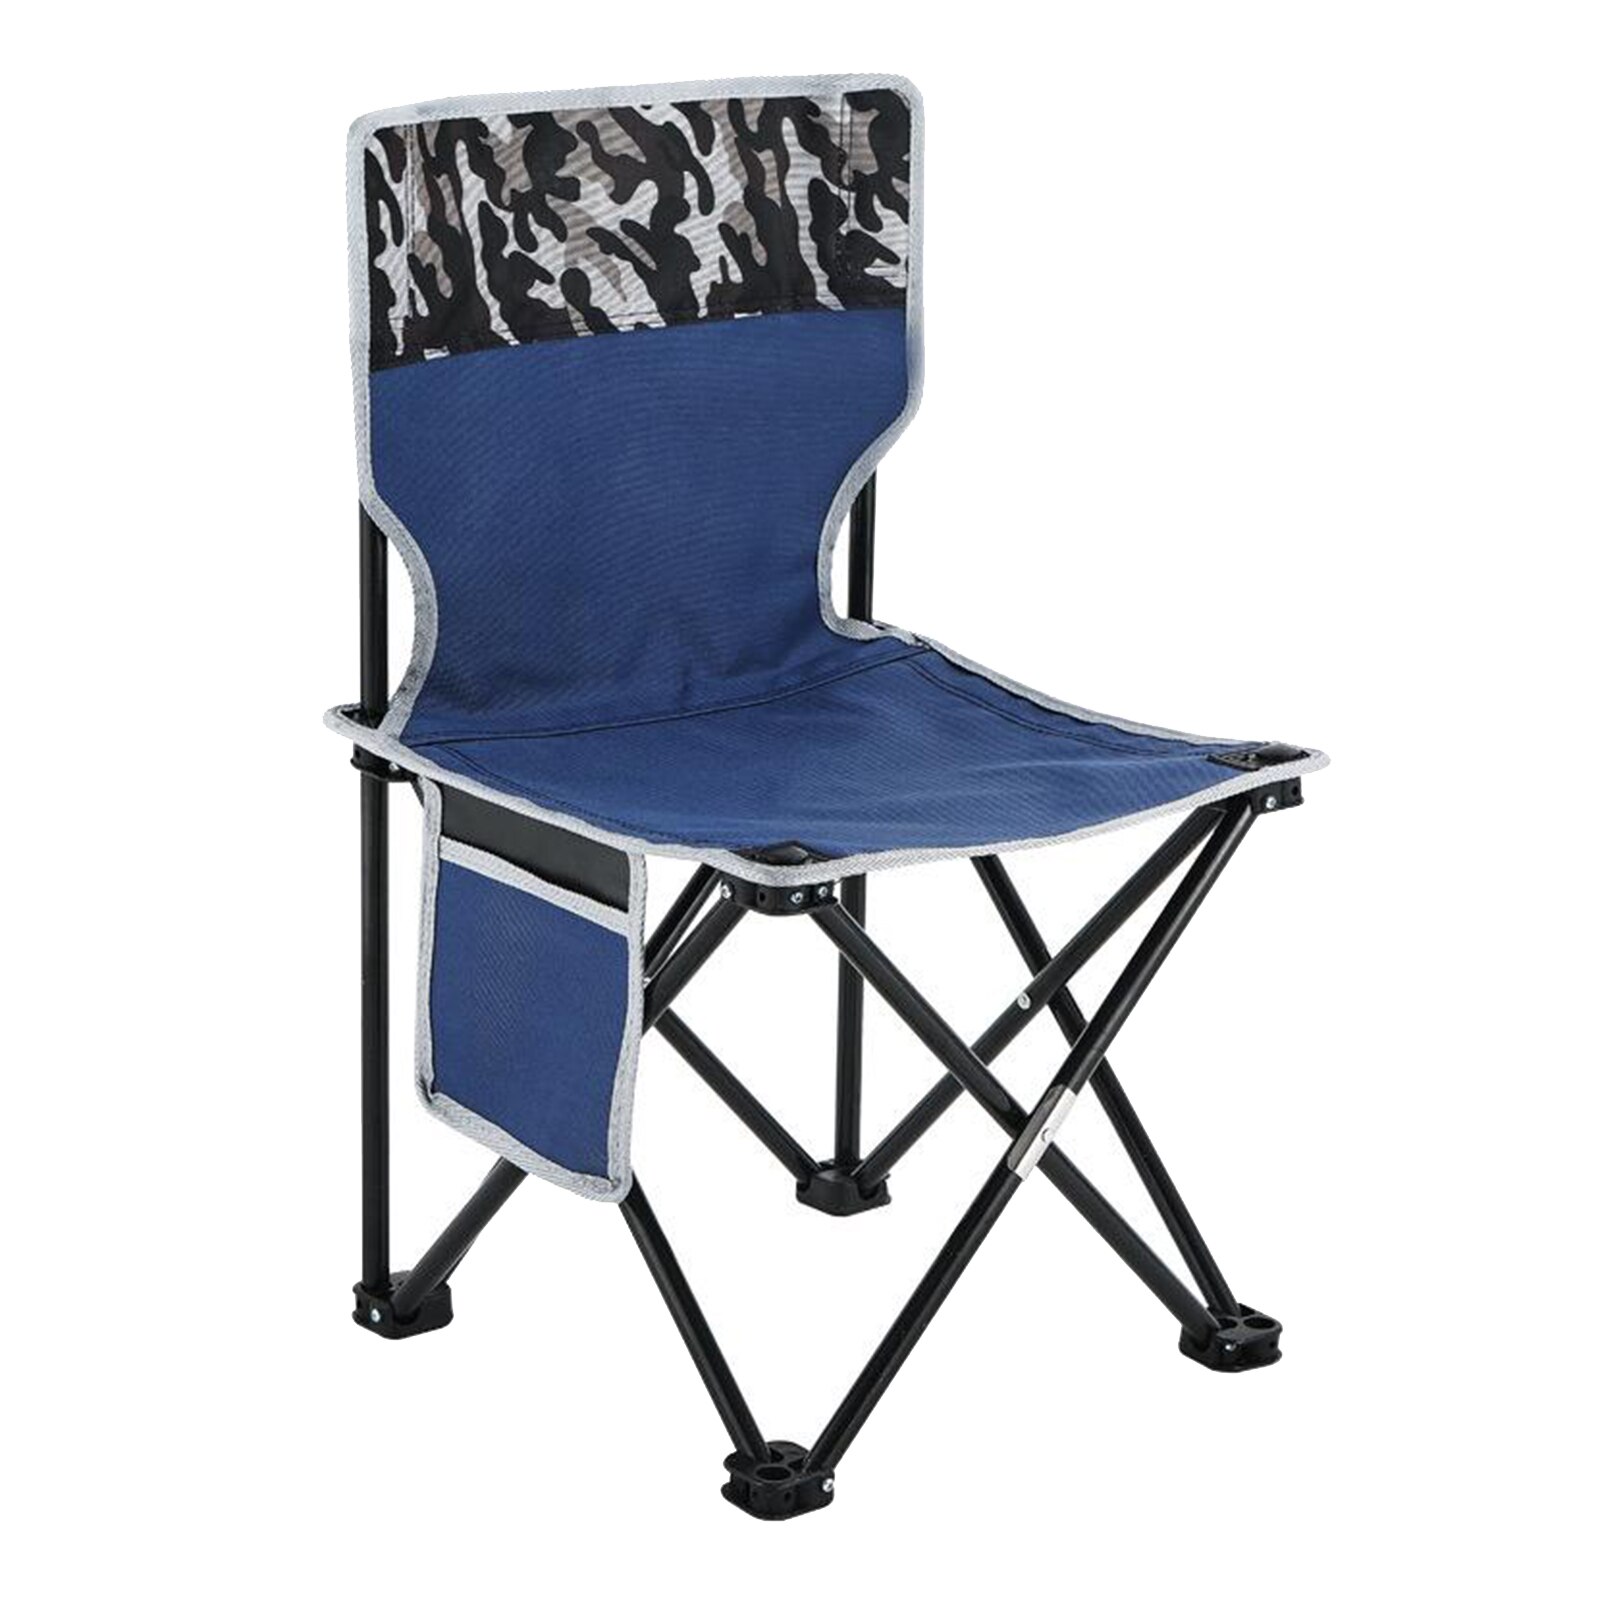 Reinforced Folding Camping Chairs, Foldable Lawn Picnic BBQ Picnic Backrest: Camo L